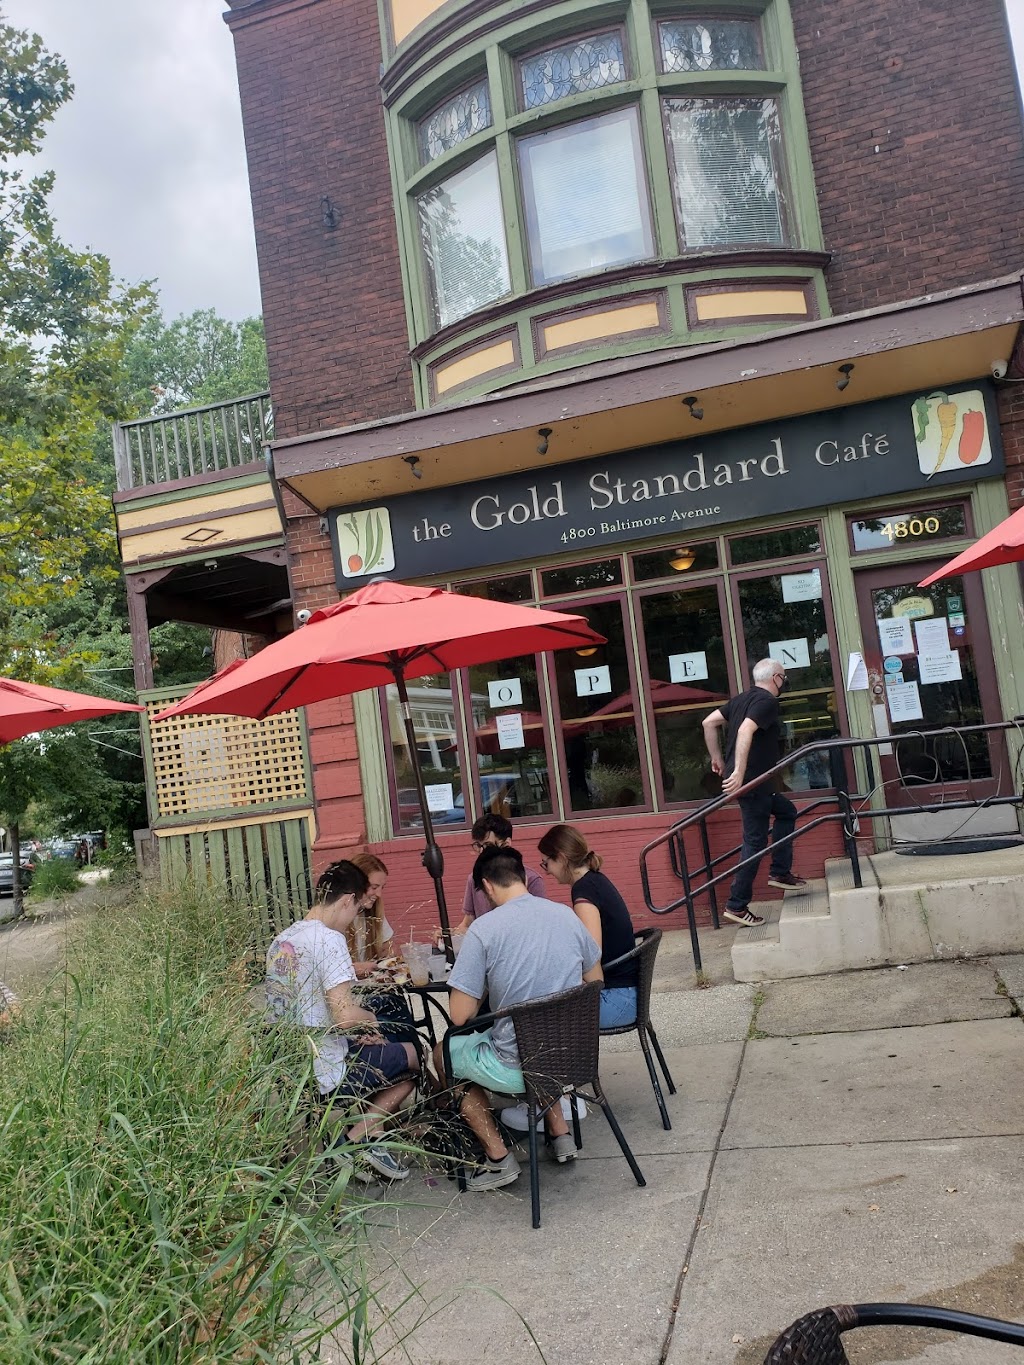 The Gold Standard Cafe | 4800 Baltimore Ave, Philadelphia, PA 19143 | Phone: (215) 727-8247